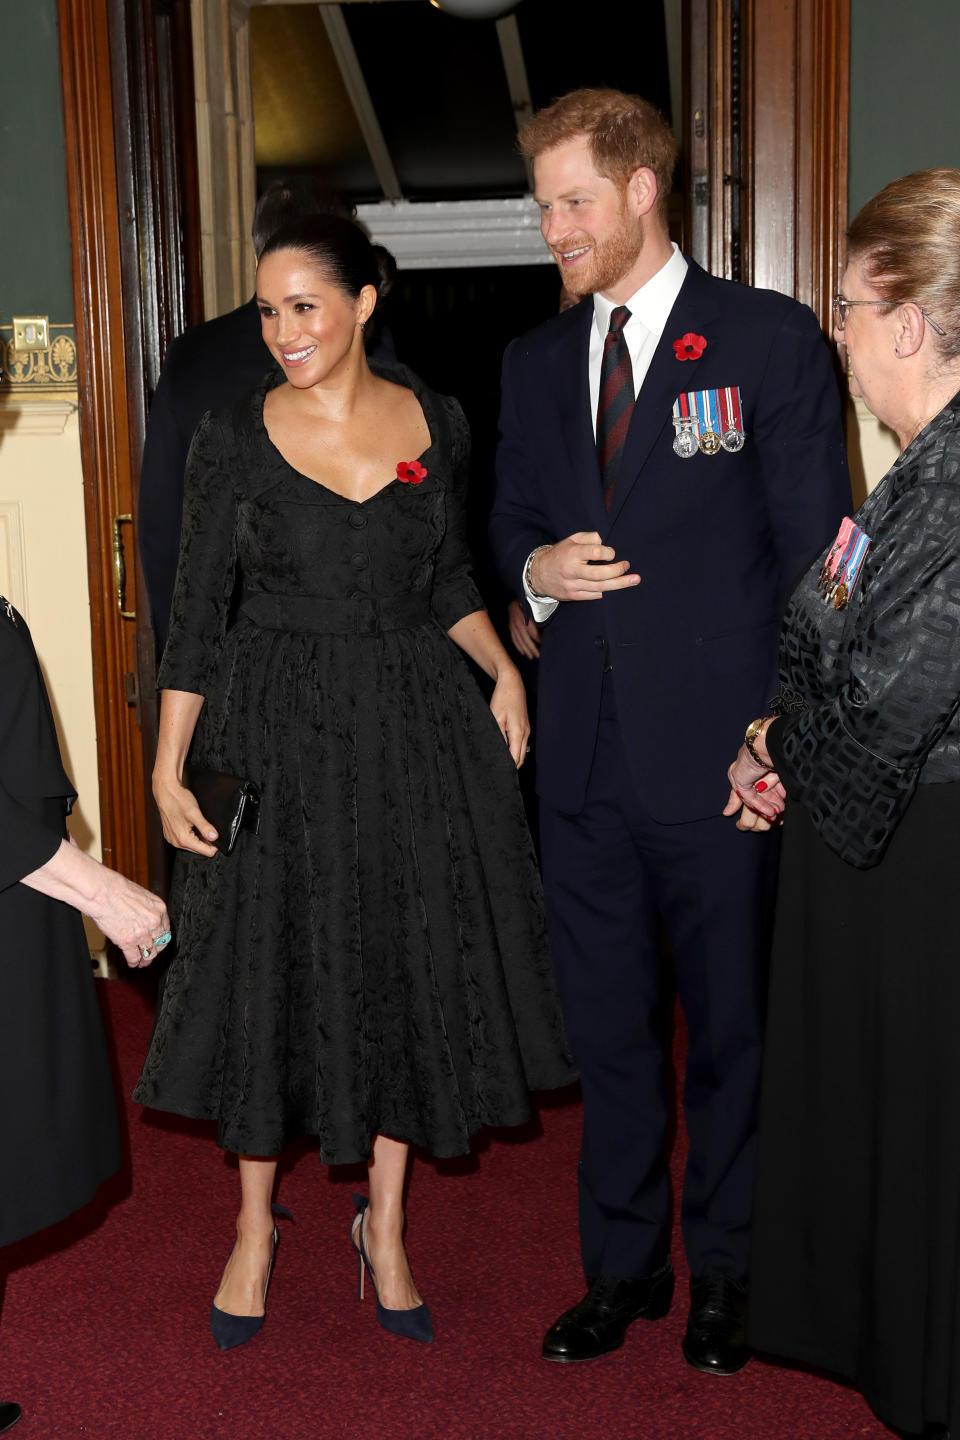 Britain's Meghan, Duchess of Sussex (L) and Britain's Prince Harry, Duke of Sussex, (R) attend the annual Royal British Legion Festival of Remembrance at the Royal Albert Hall in London on November 9, 2019. (Photo by Chris Jackson / POOL / AFP) (Photo by CHRIS JACKSON/POOL/AFP via Getty Images)